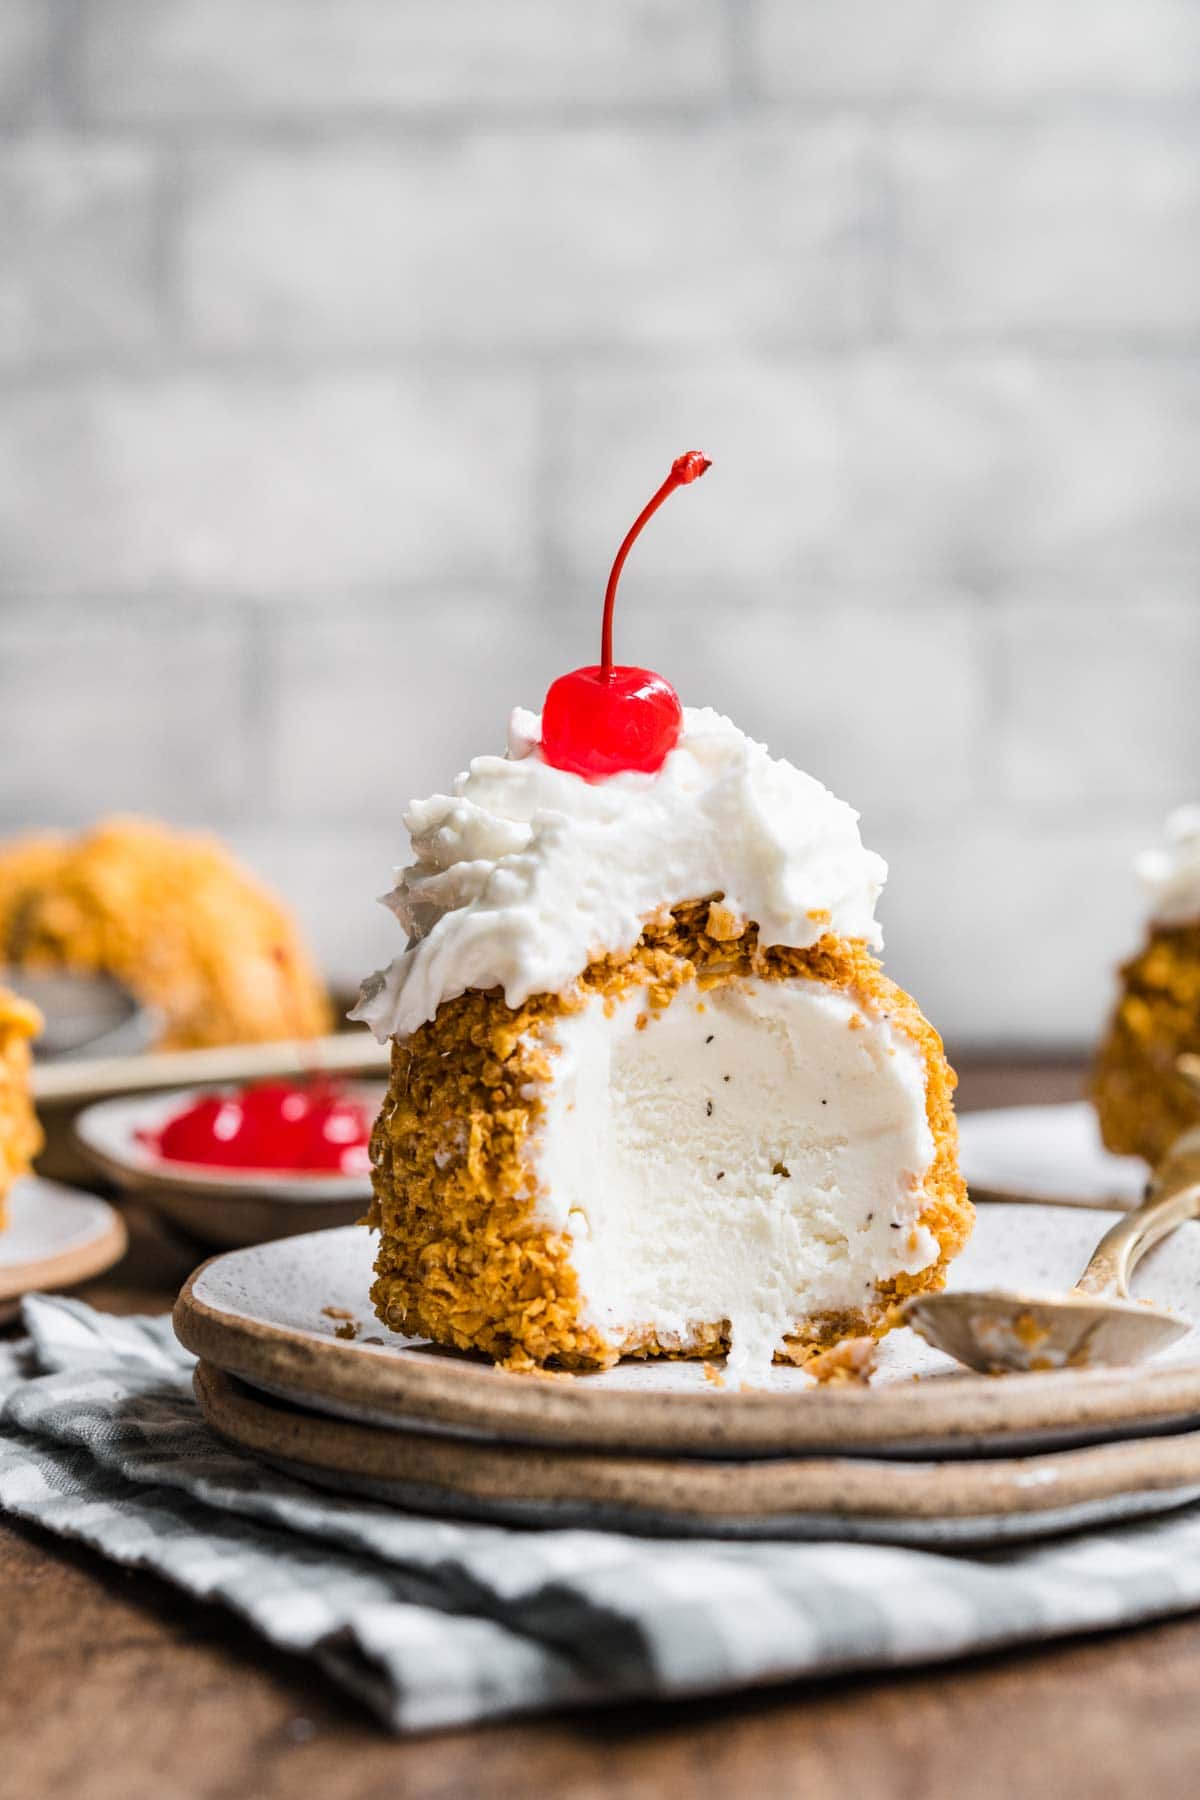 New Year Eve's recipe: Delicious fried ice cream